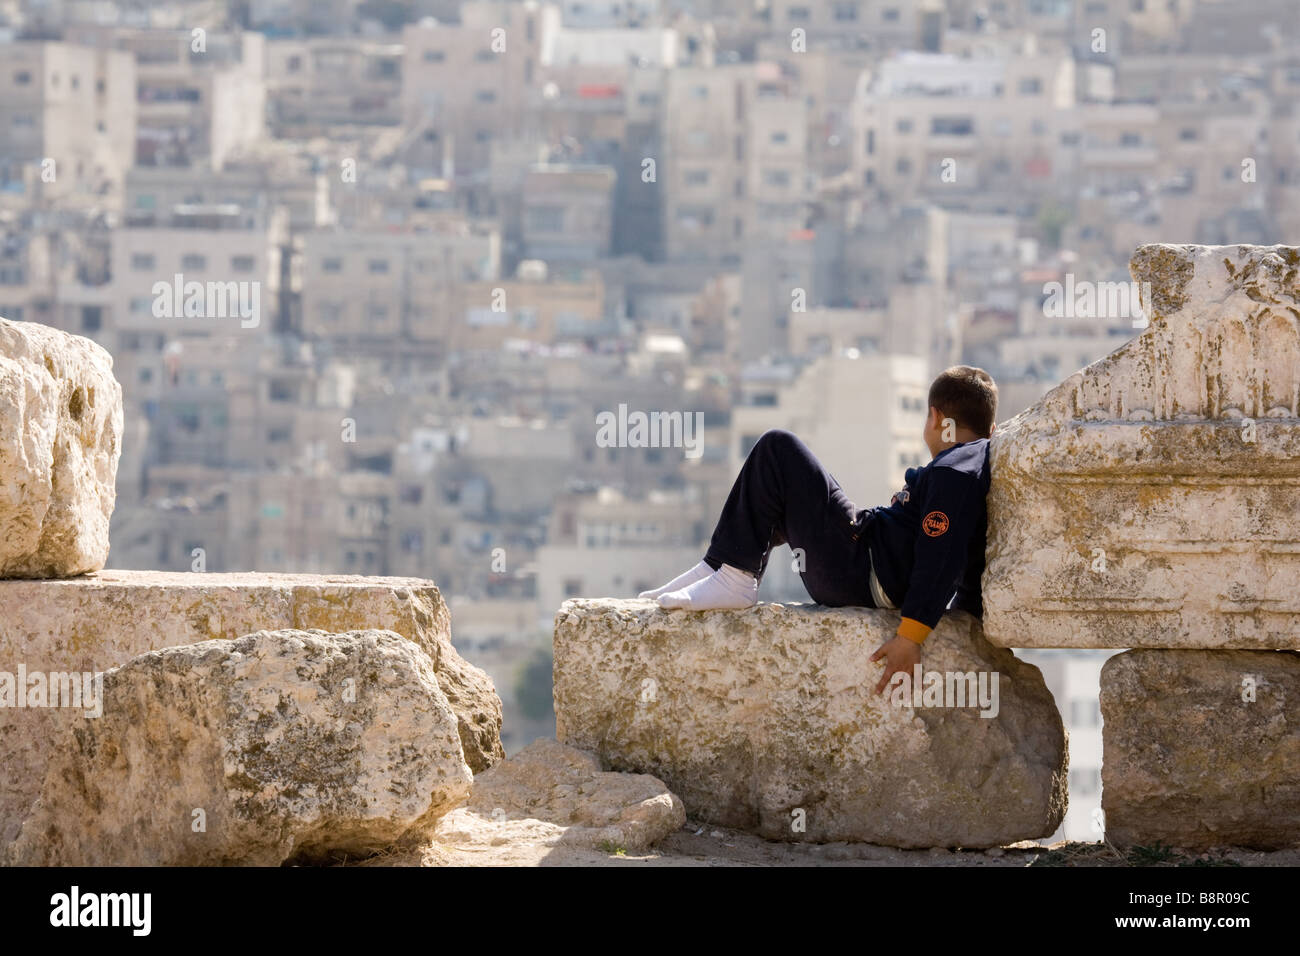 A young Jordanian boy child looking out over the city, The Citadel, Amman, Jordan, MIddle East Stock Photo